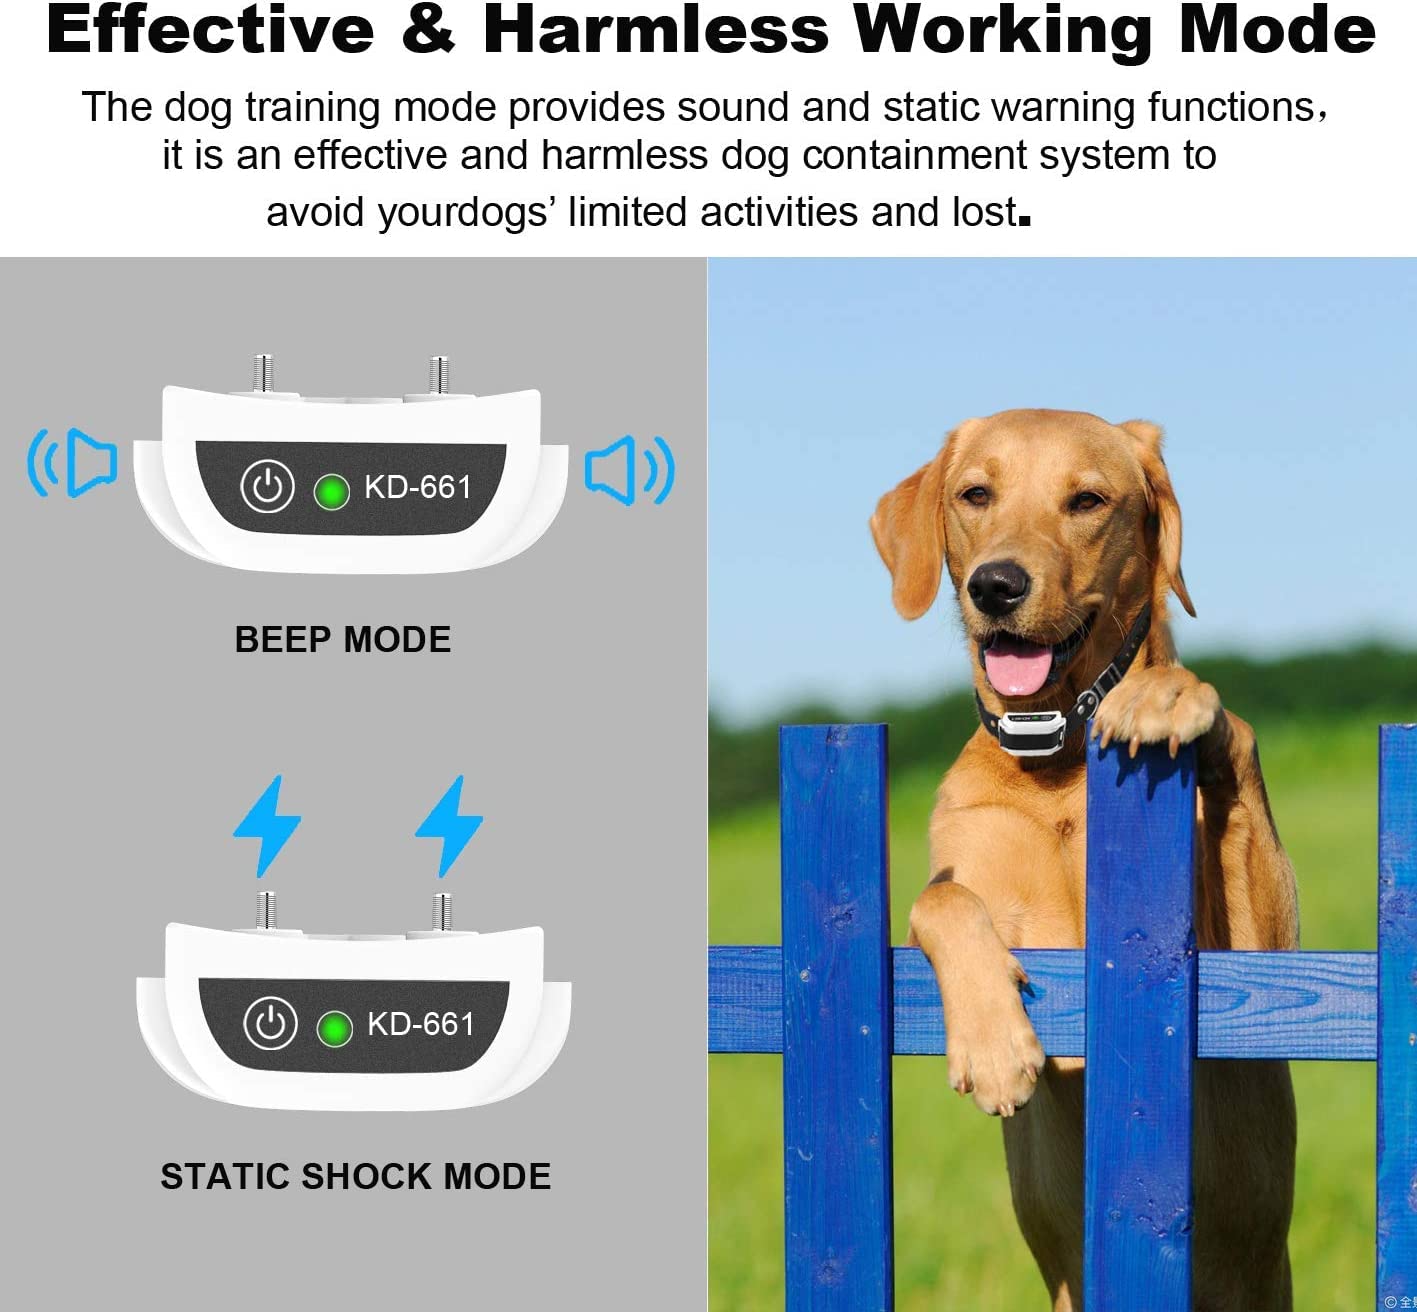 HEXIEDEN Wireless Dog Fence Pet Containment System Boundary Container,Training Collar with Electric Shock Sound Correction,Waterproof,Rechargeable,Adjustable Range Up to 1640ft,for All Dogs,for2dogs